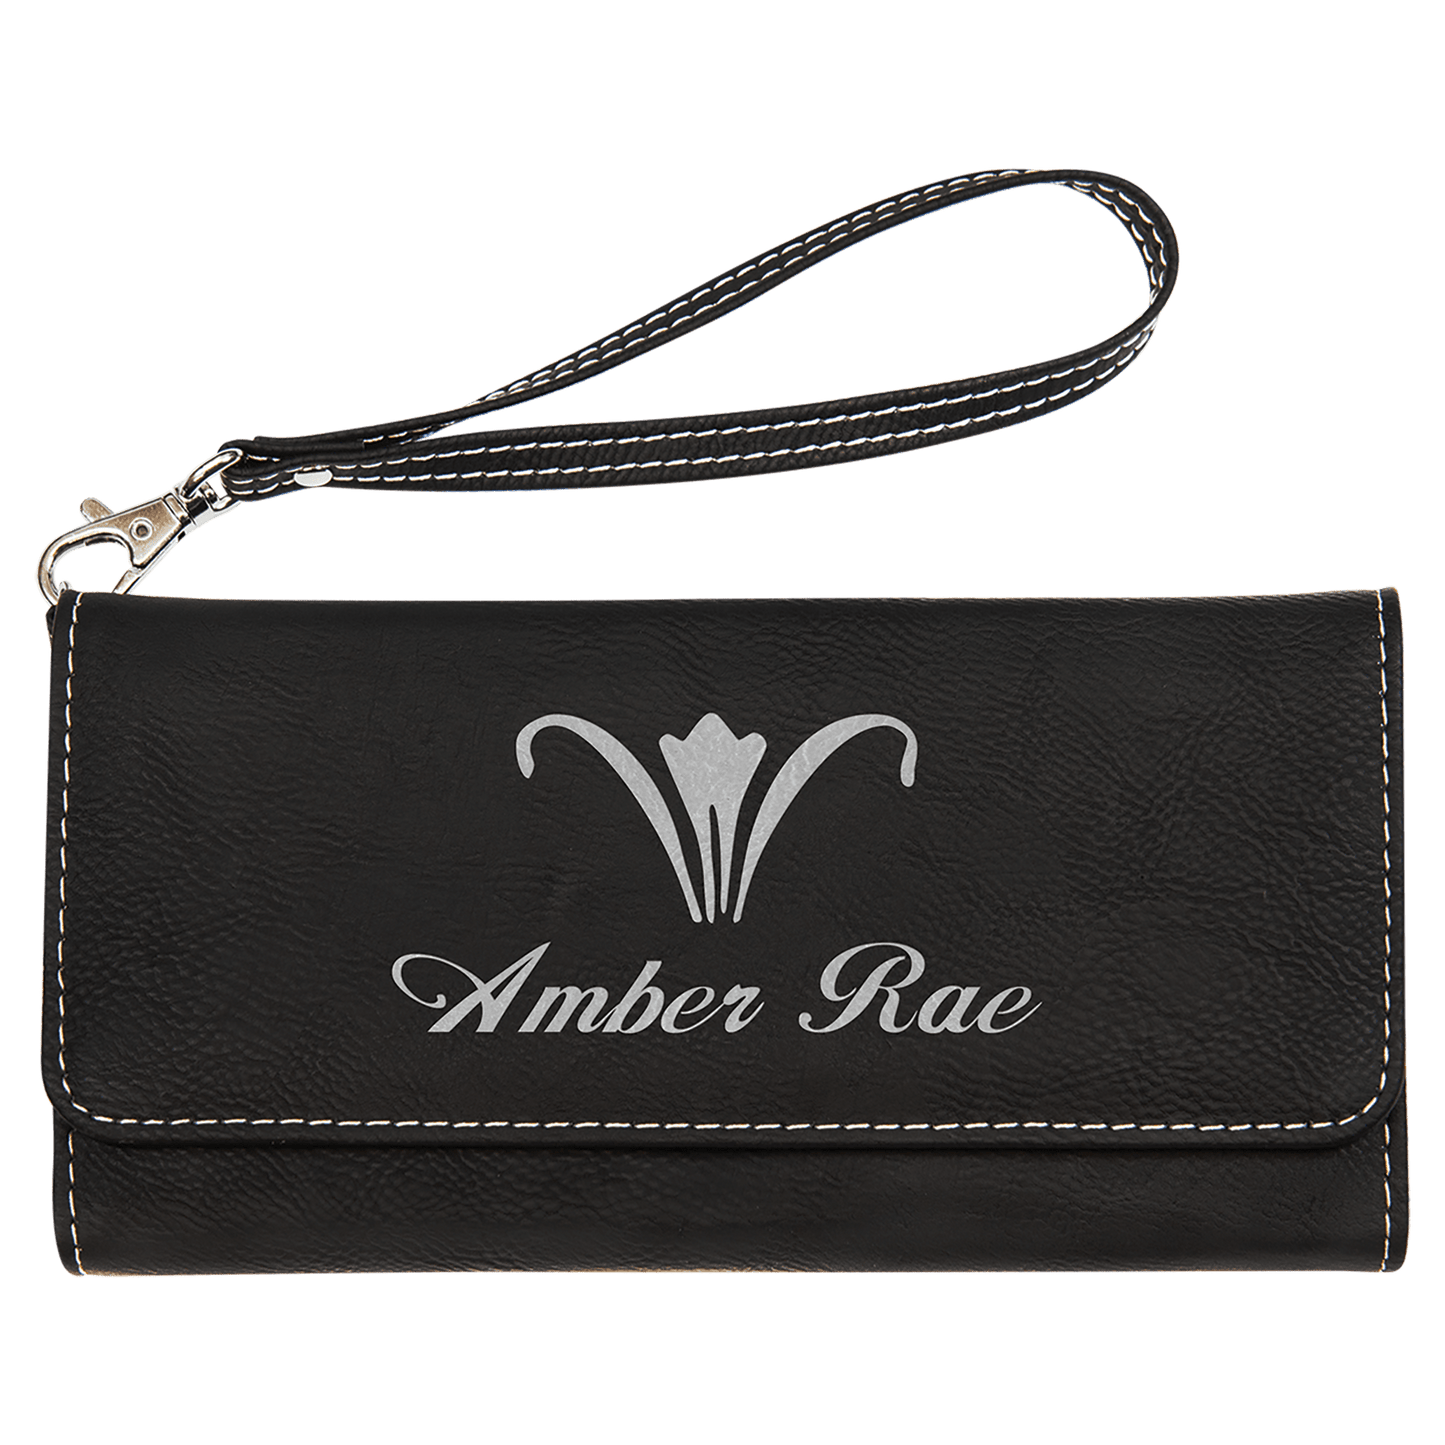 7 1/2" x 4" Laserable Leatherette Wallet with Strap